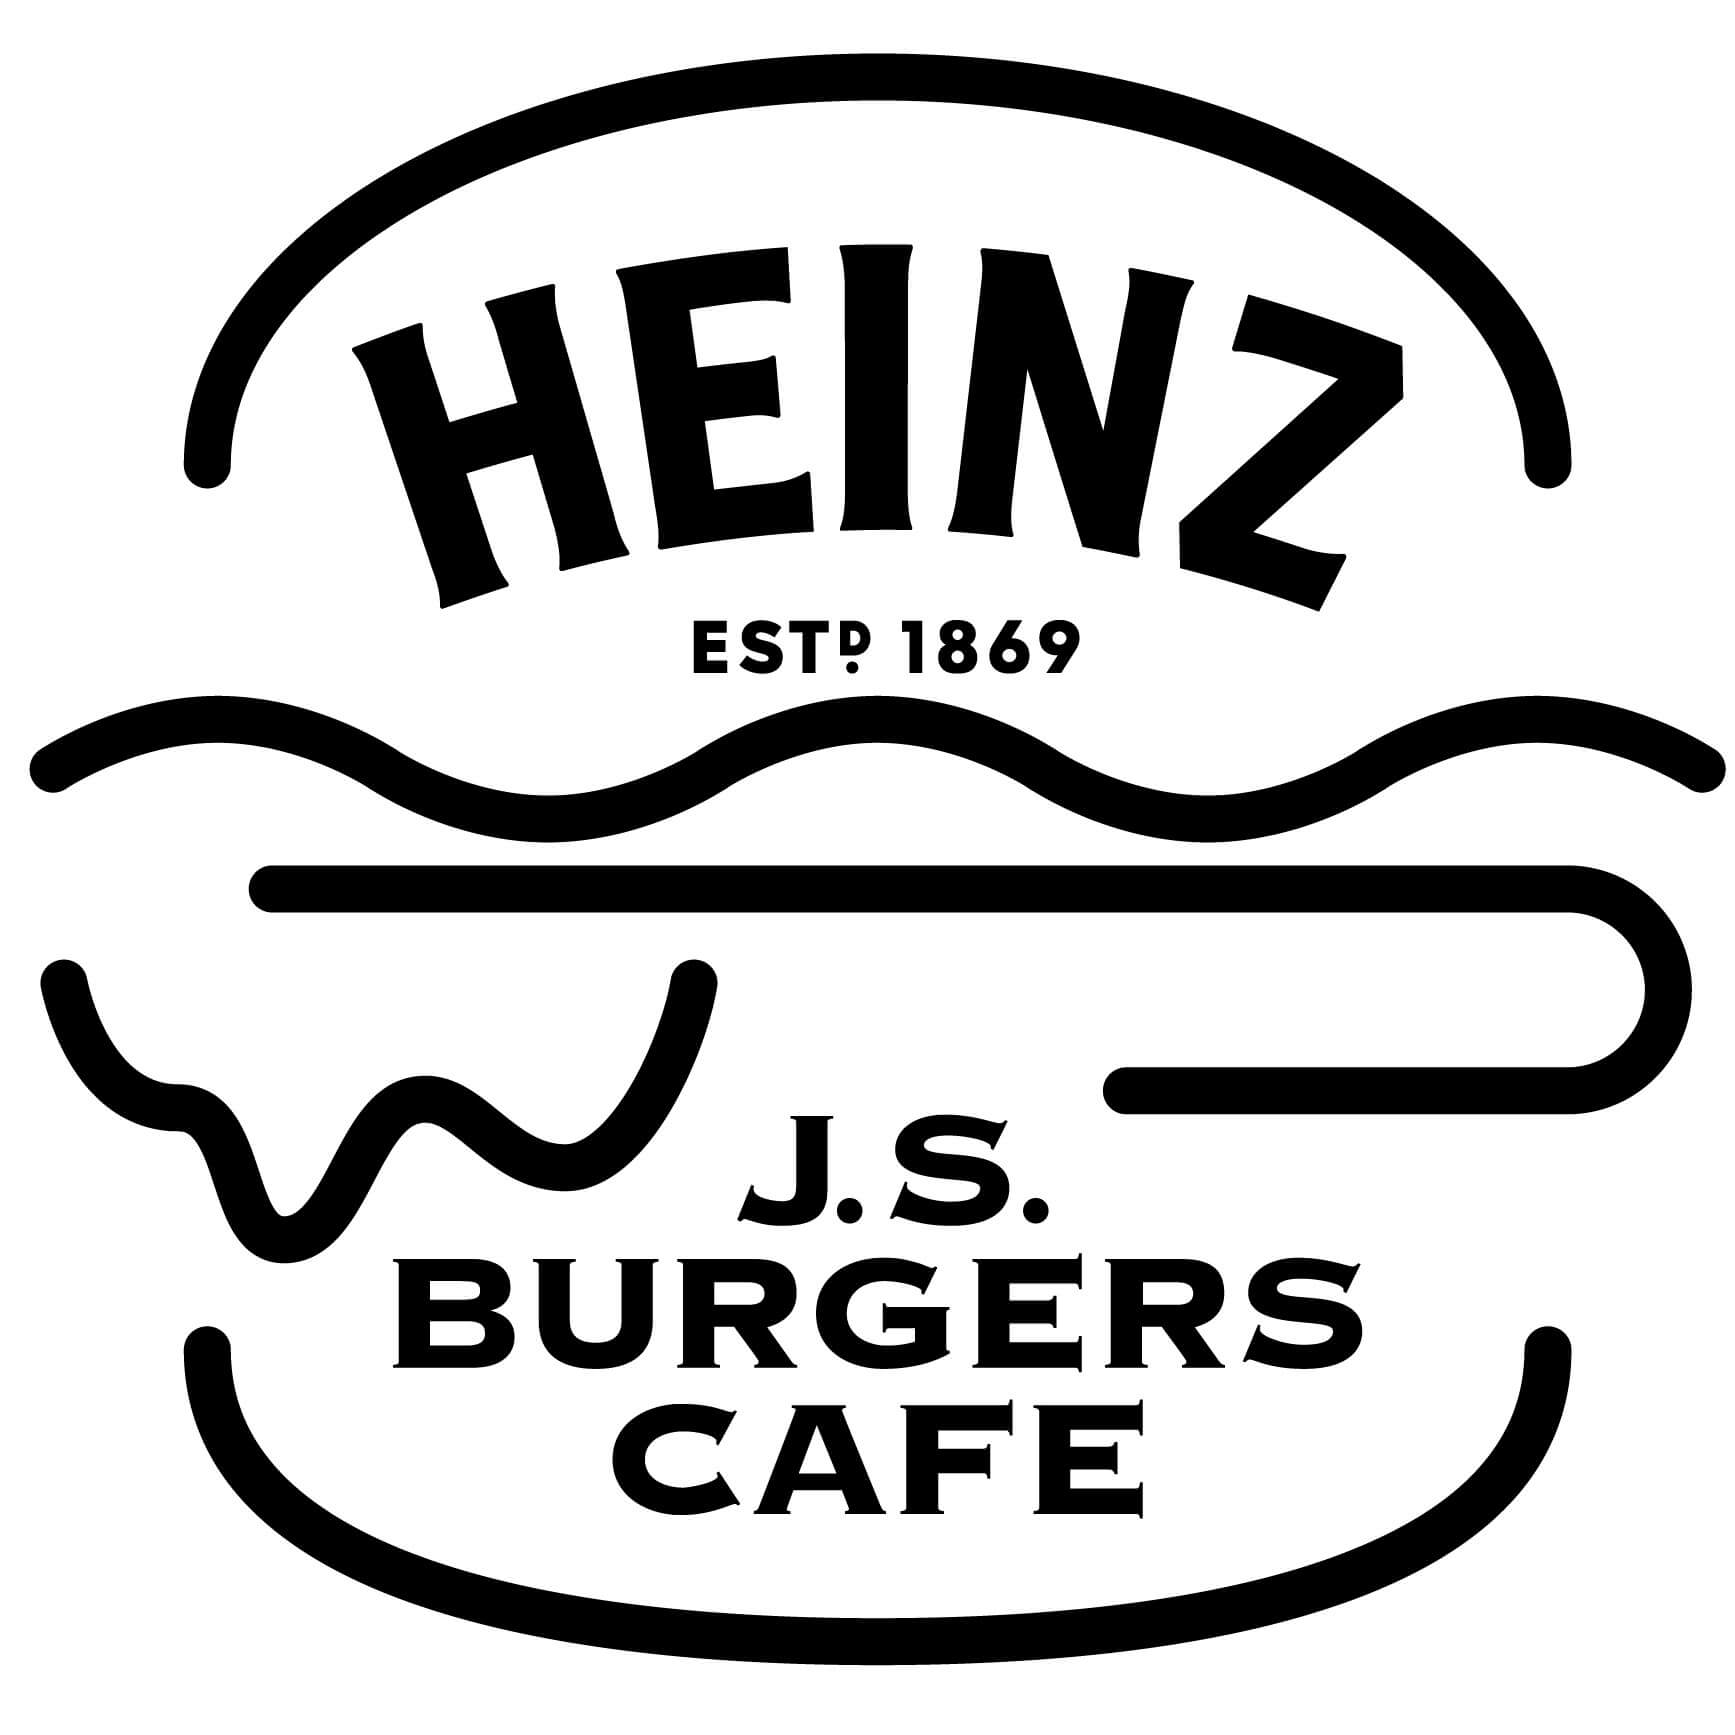 J.S. BURGERS CAFE『HEINZ BURGER』-ハインツバーガーフェアロゴ